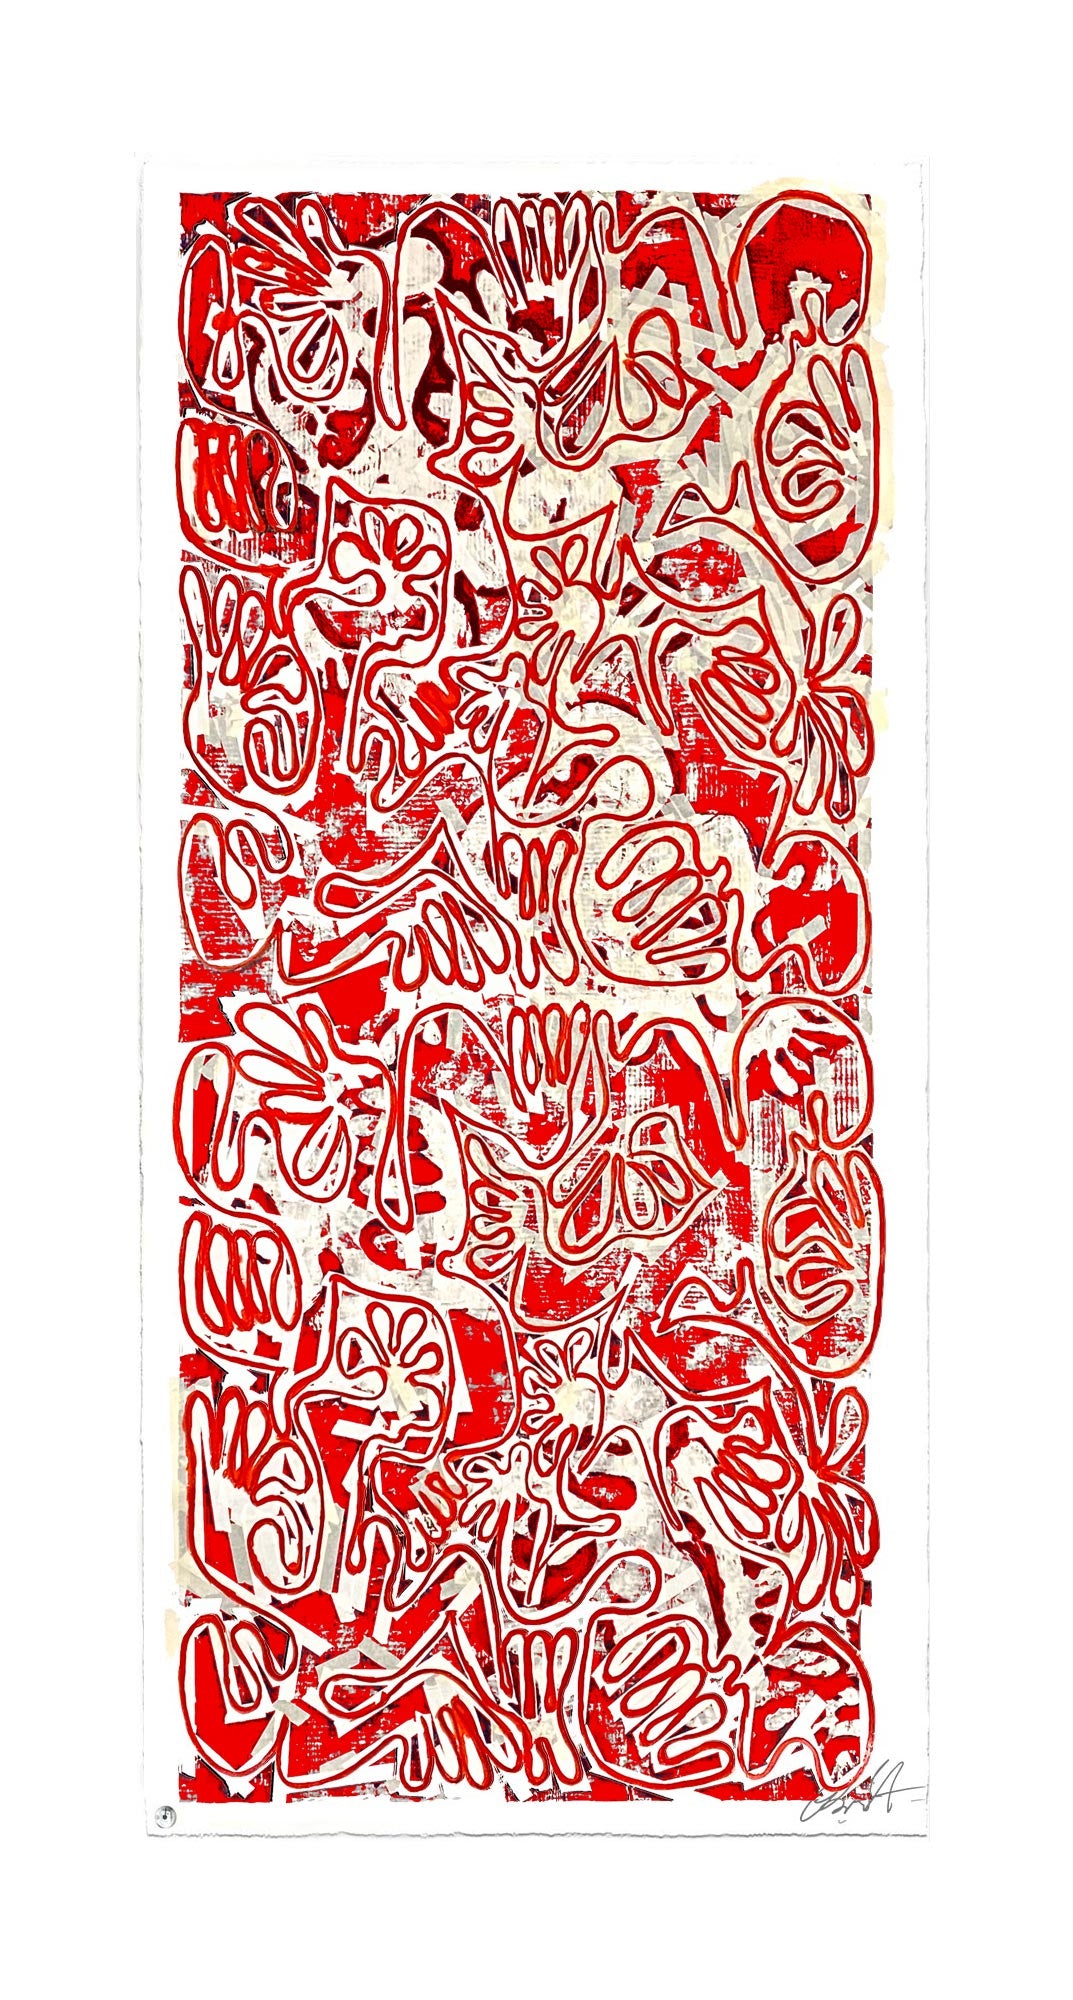 "Covid Chaos Pacific Red (40 x 100in)" by Robert Santore ©2022. Framed, Hand painted artist silkscreen print, hand printed on the finest archival cold press cotton rag paper with hand torn edges. Painted in the Manhattan studio.